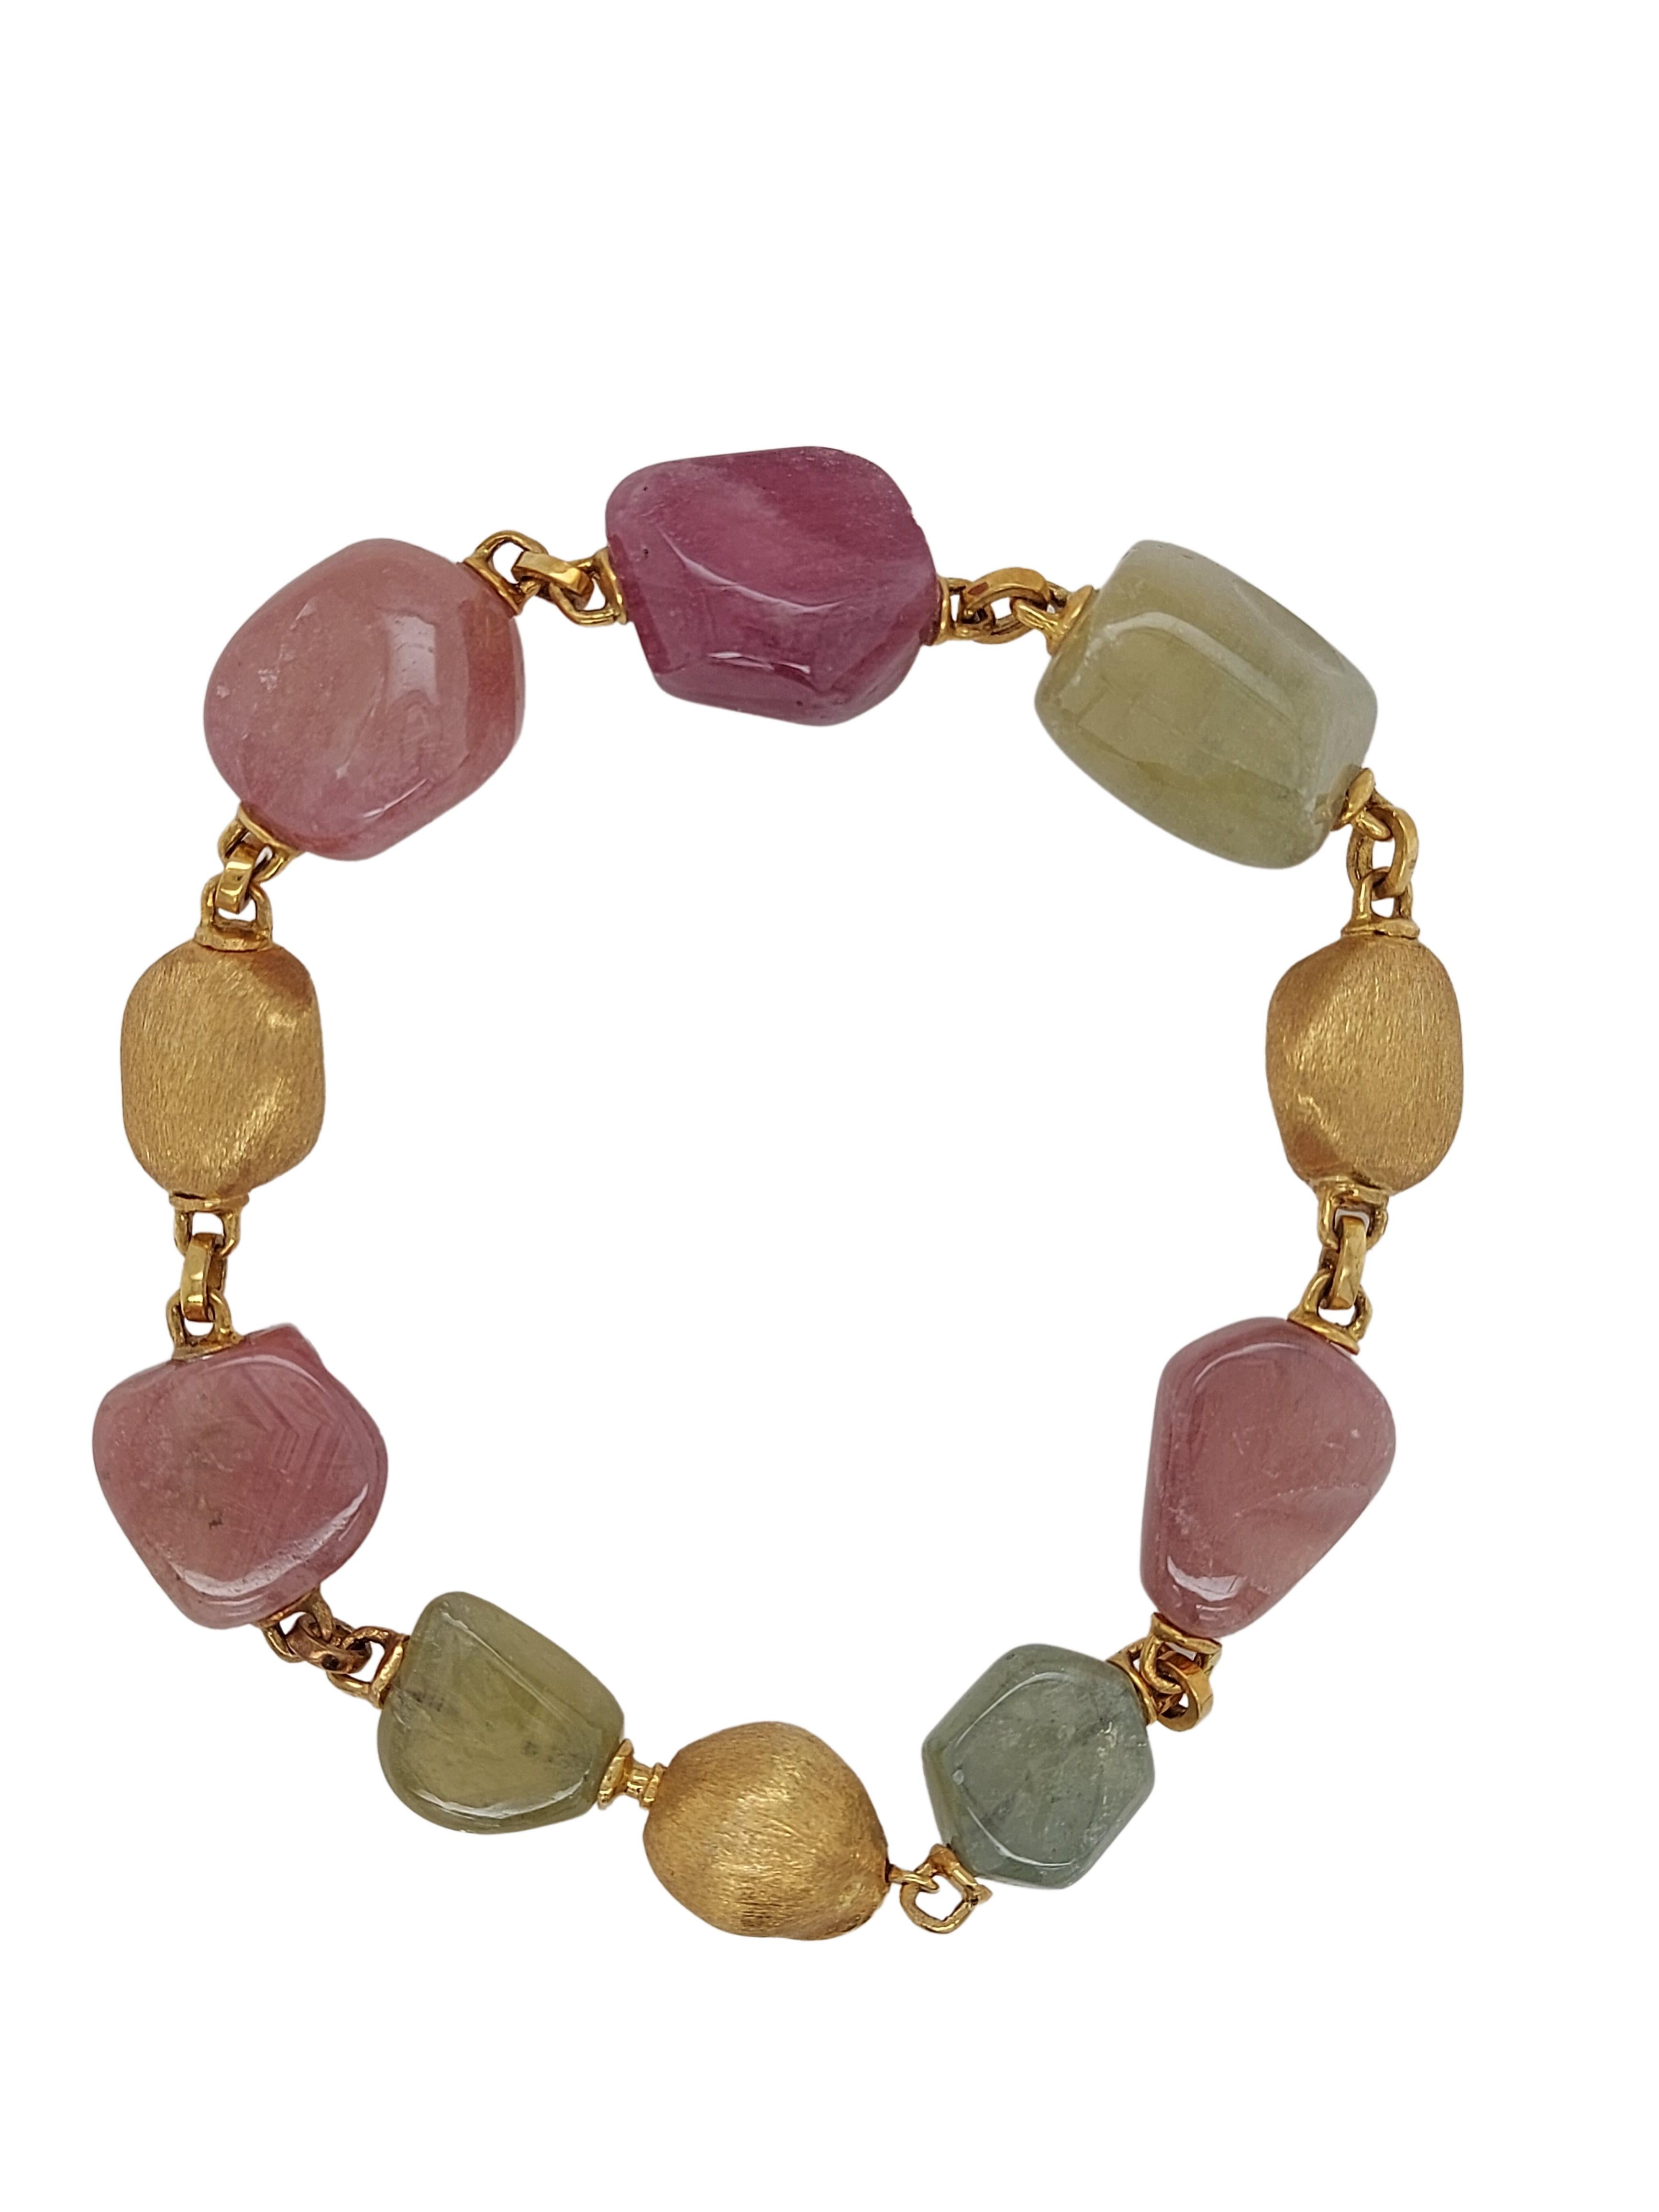 Rough Cut 920 Carat Rough Natural Sapphires and 18 kt Gold Yvel Necklace, Bracelet, Ring For Sale